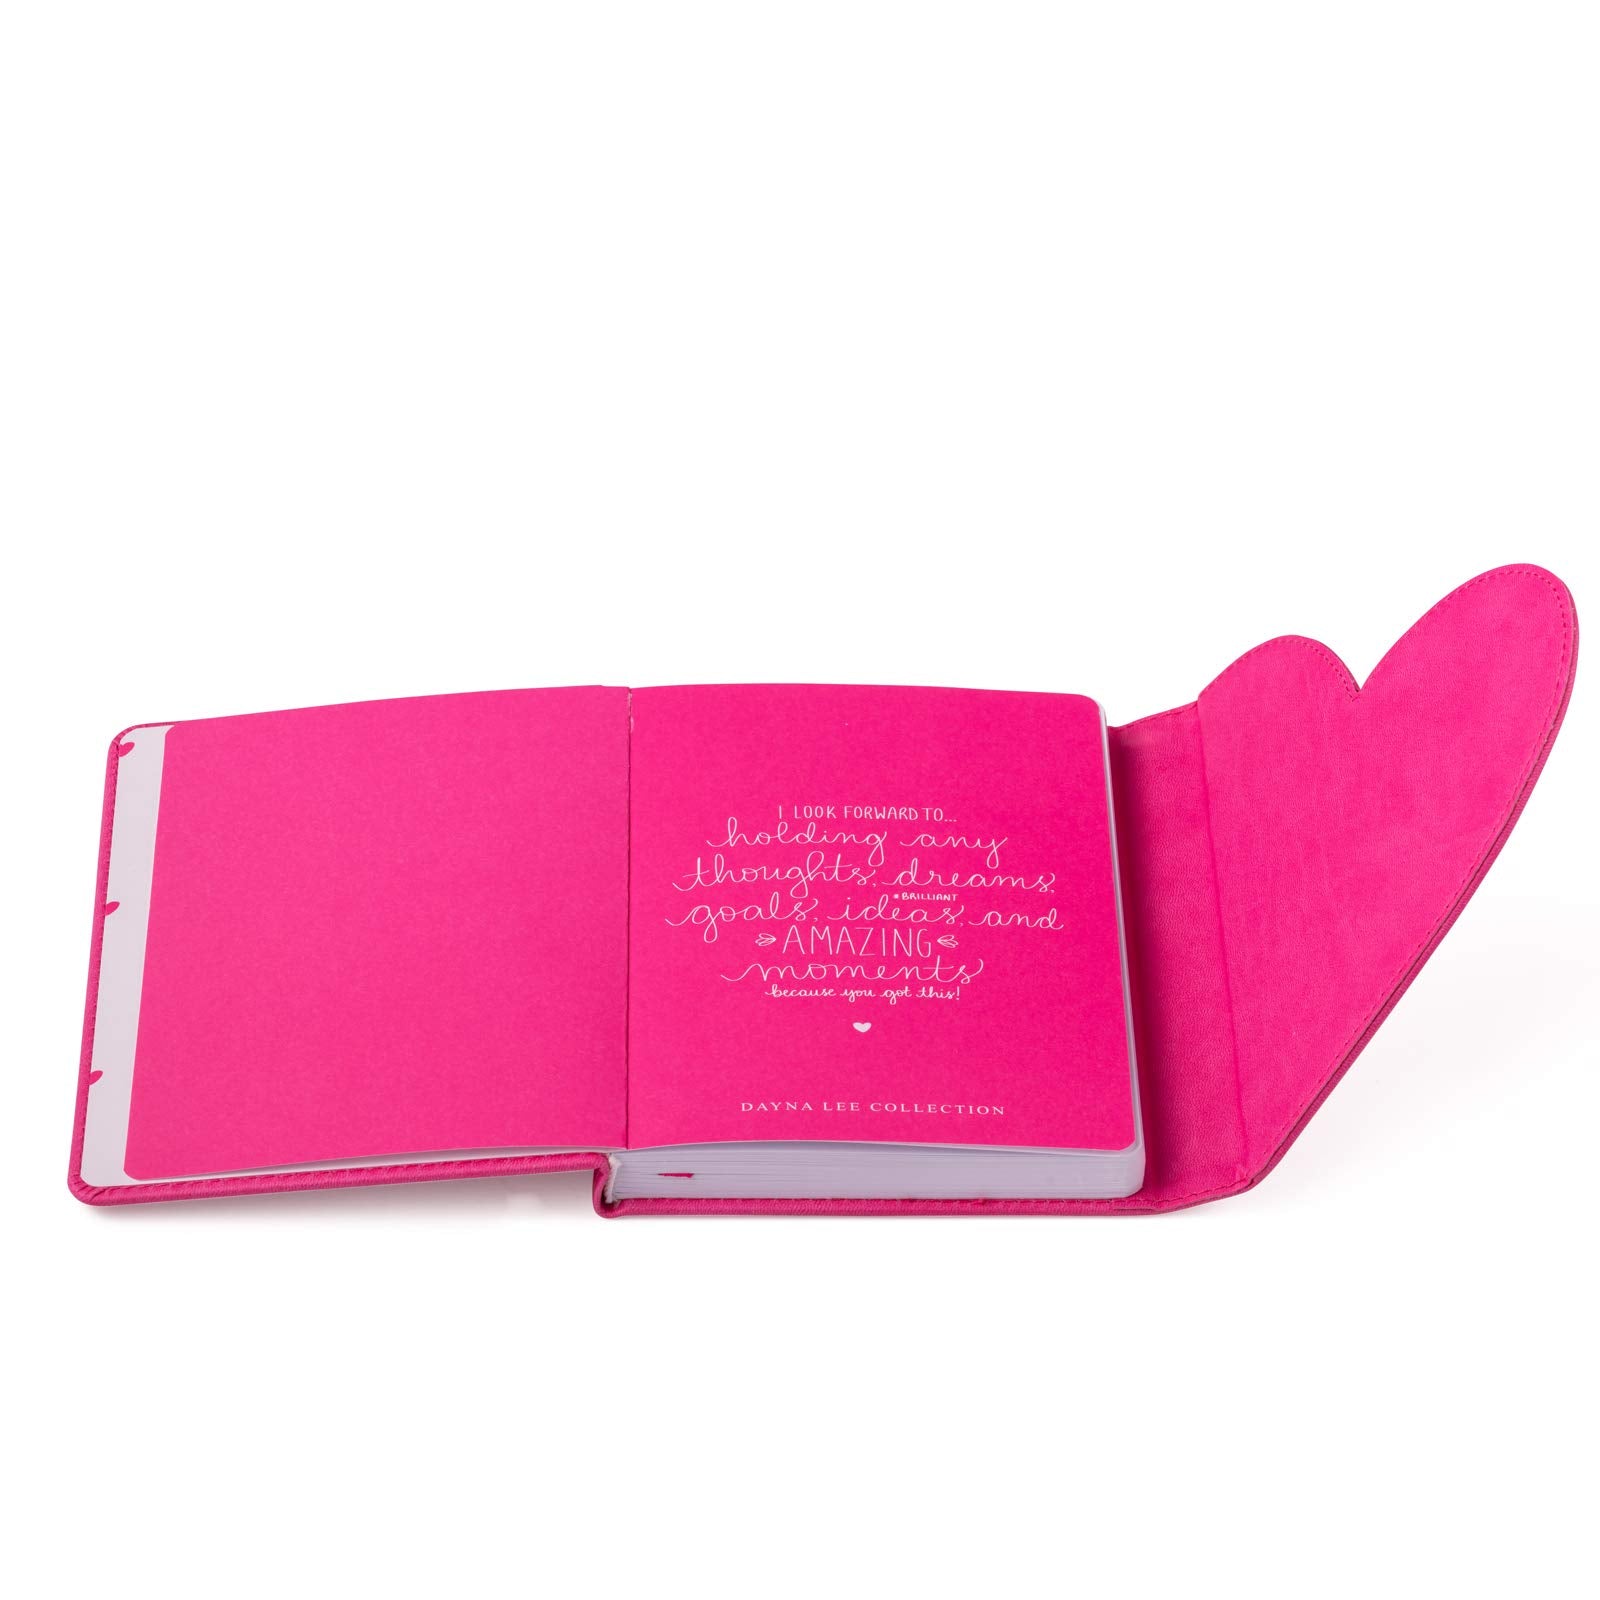 5.5-x-7-inch Eccolo Dayna Lee Love Journal & Notebook